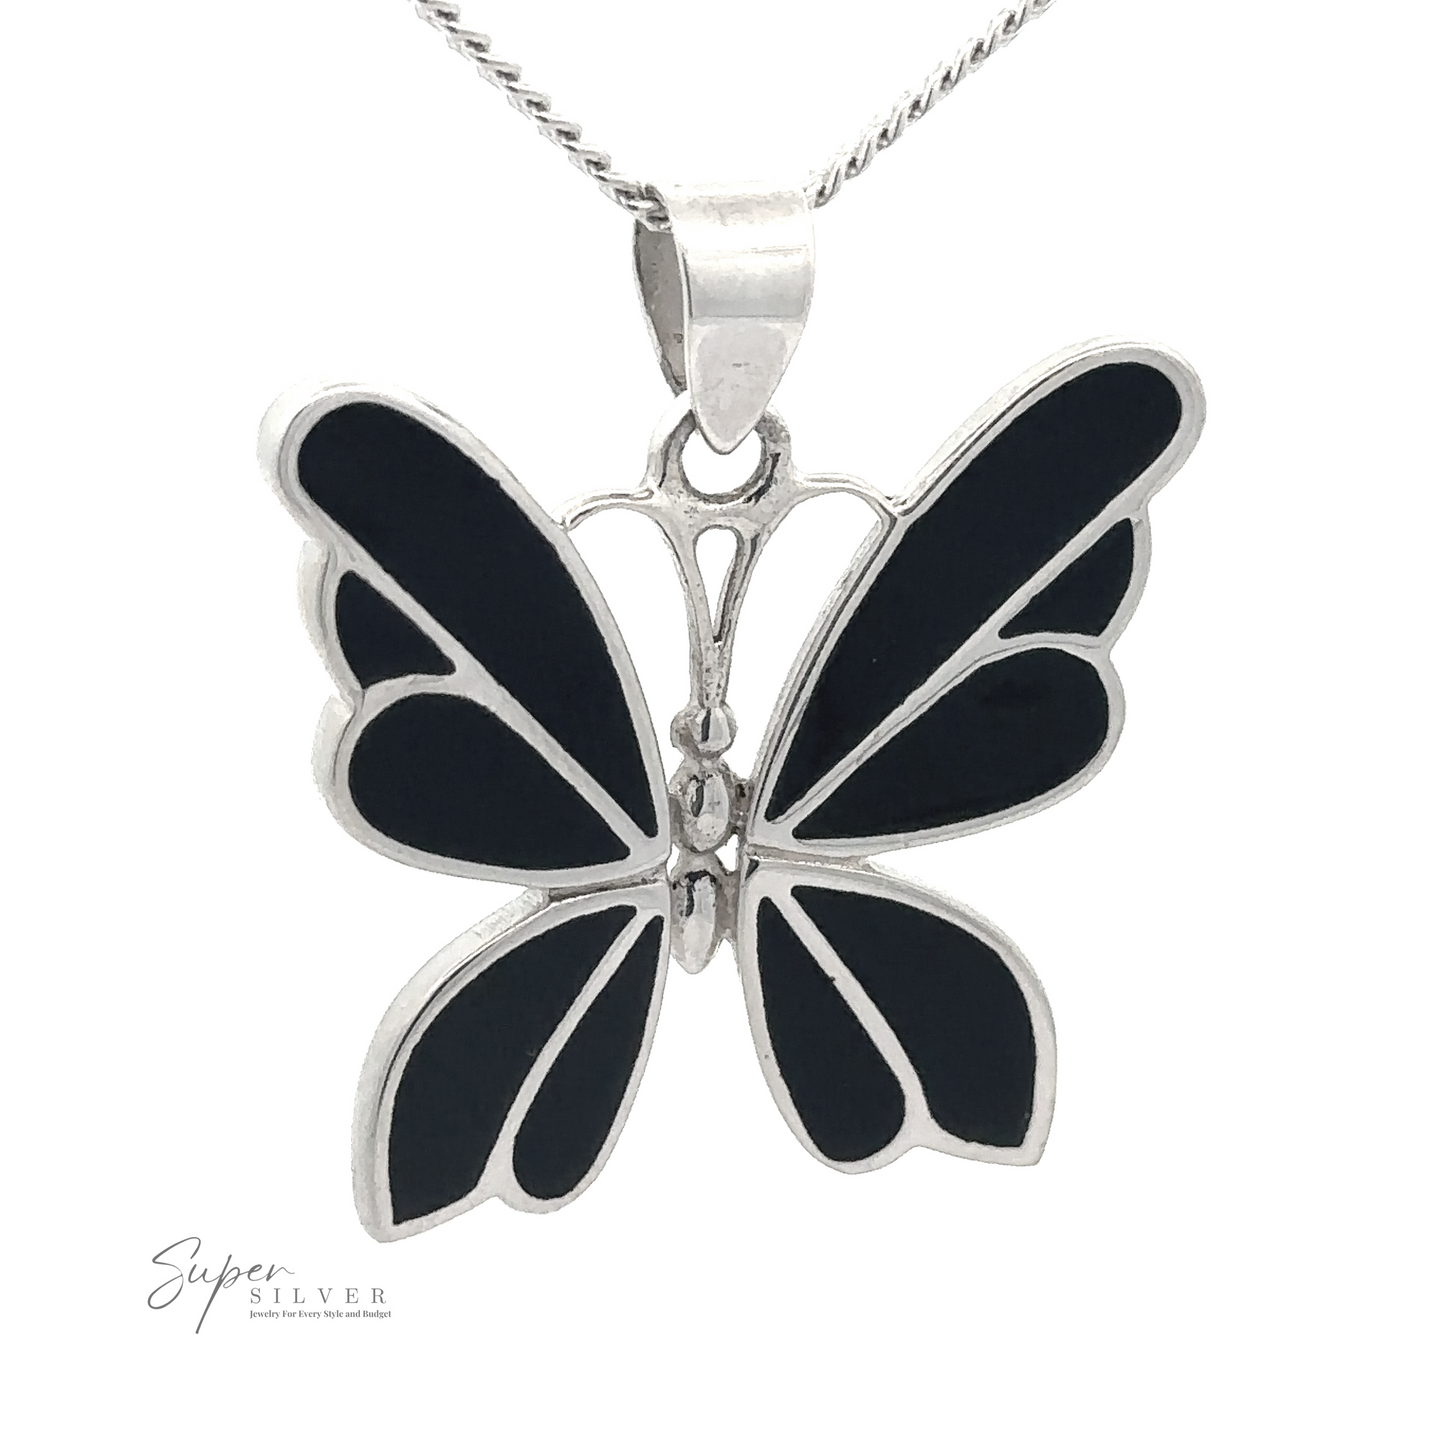 
                  
                    A **Medium Inlay Butterfly Pendant** with black inlays on a silver chain. The text "Super Silver" is visible in the lower left corner, adding a touch of elegance to this stunning piece.
                  
                